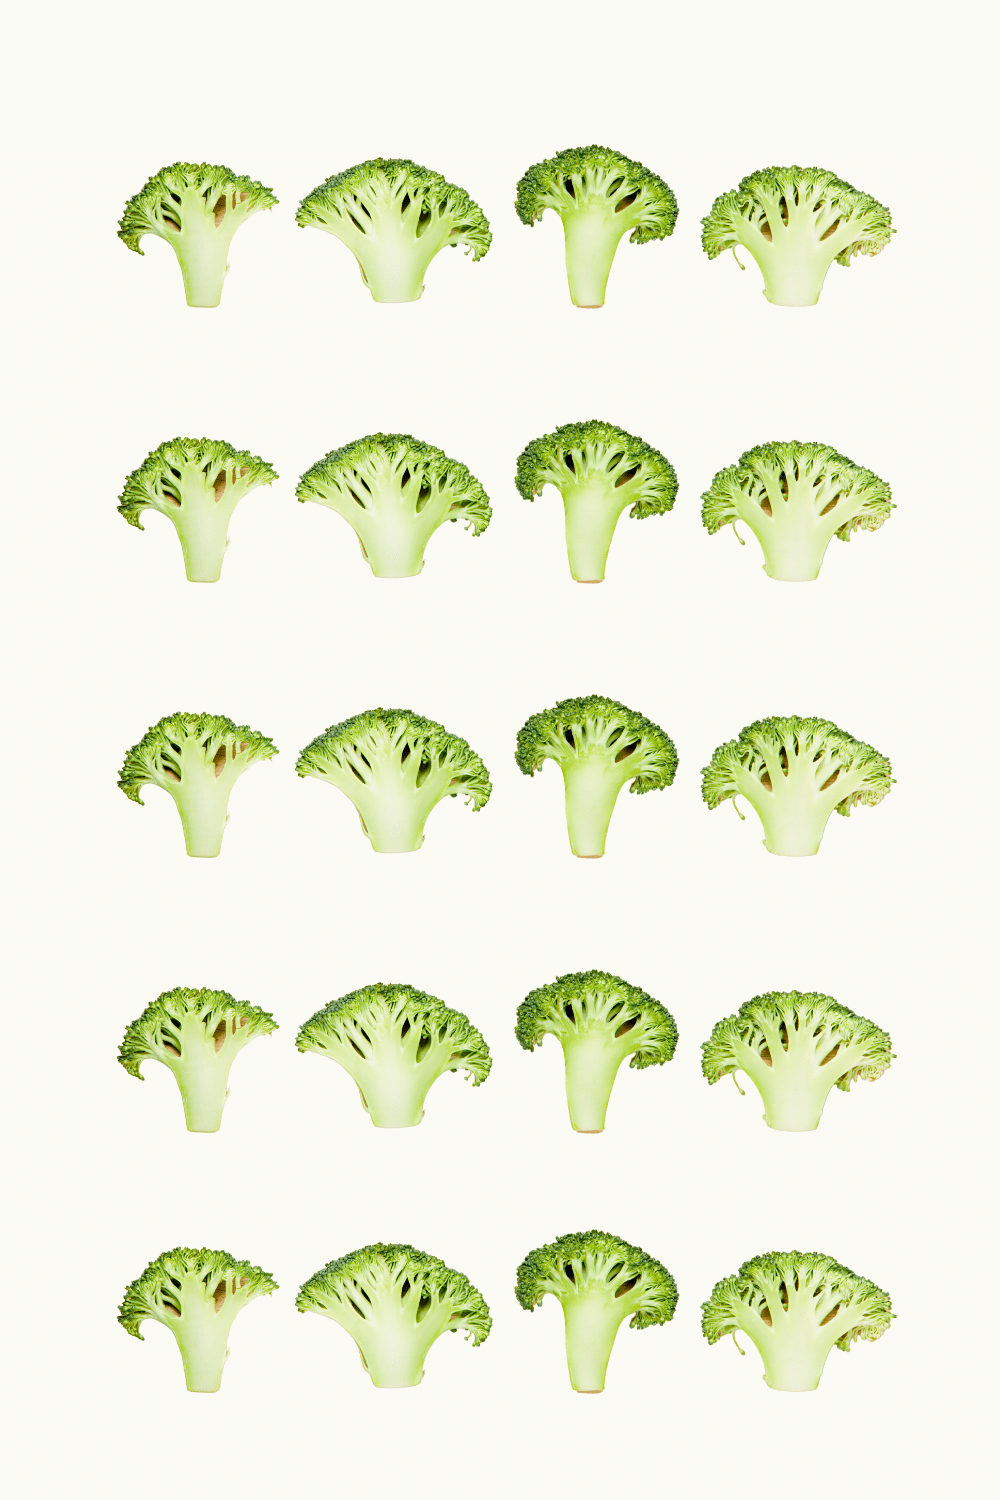 Tip showing broccoli sliced so that it has a lot of flat surfaces